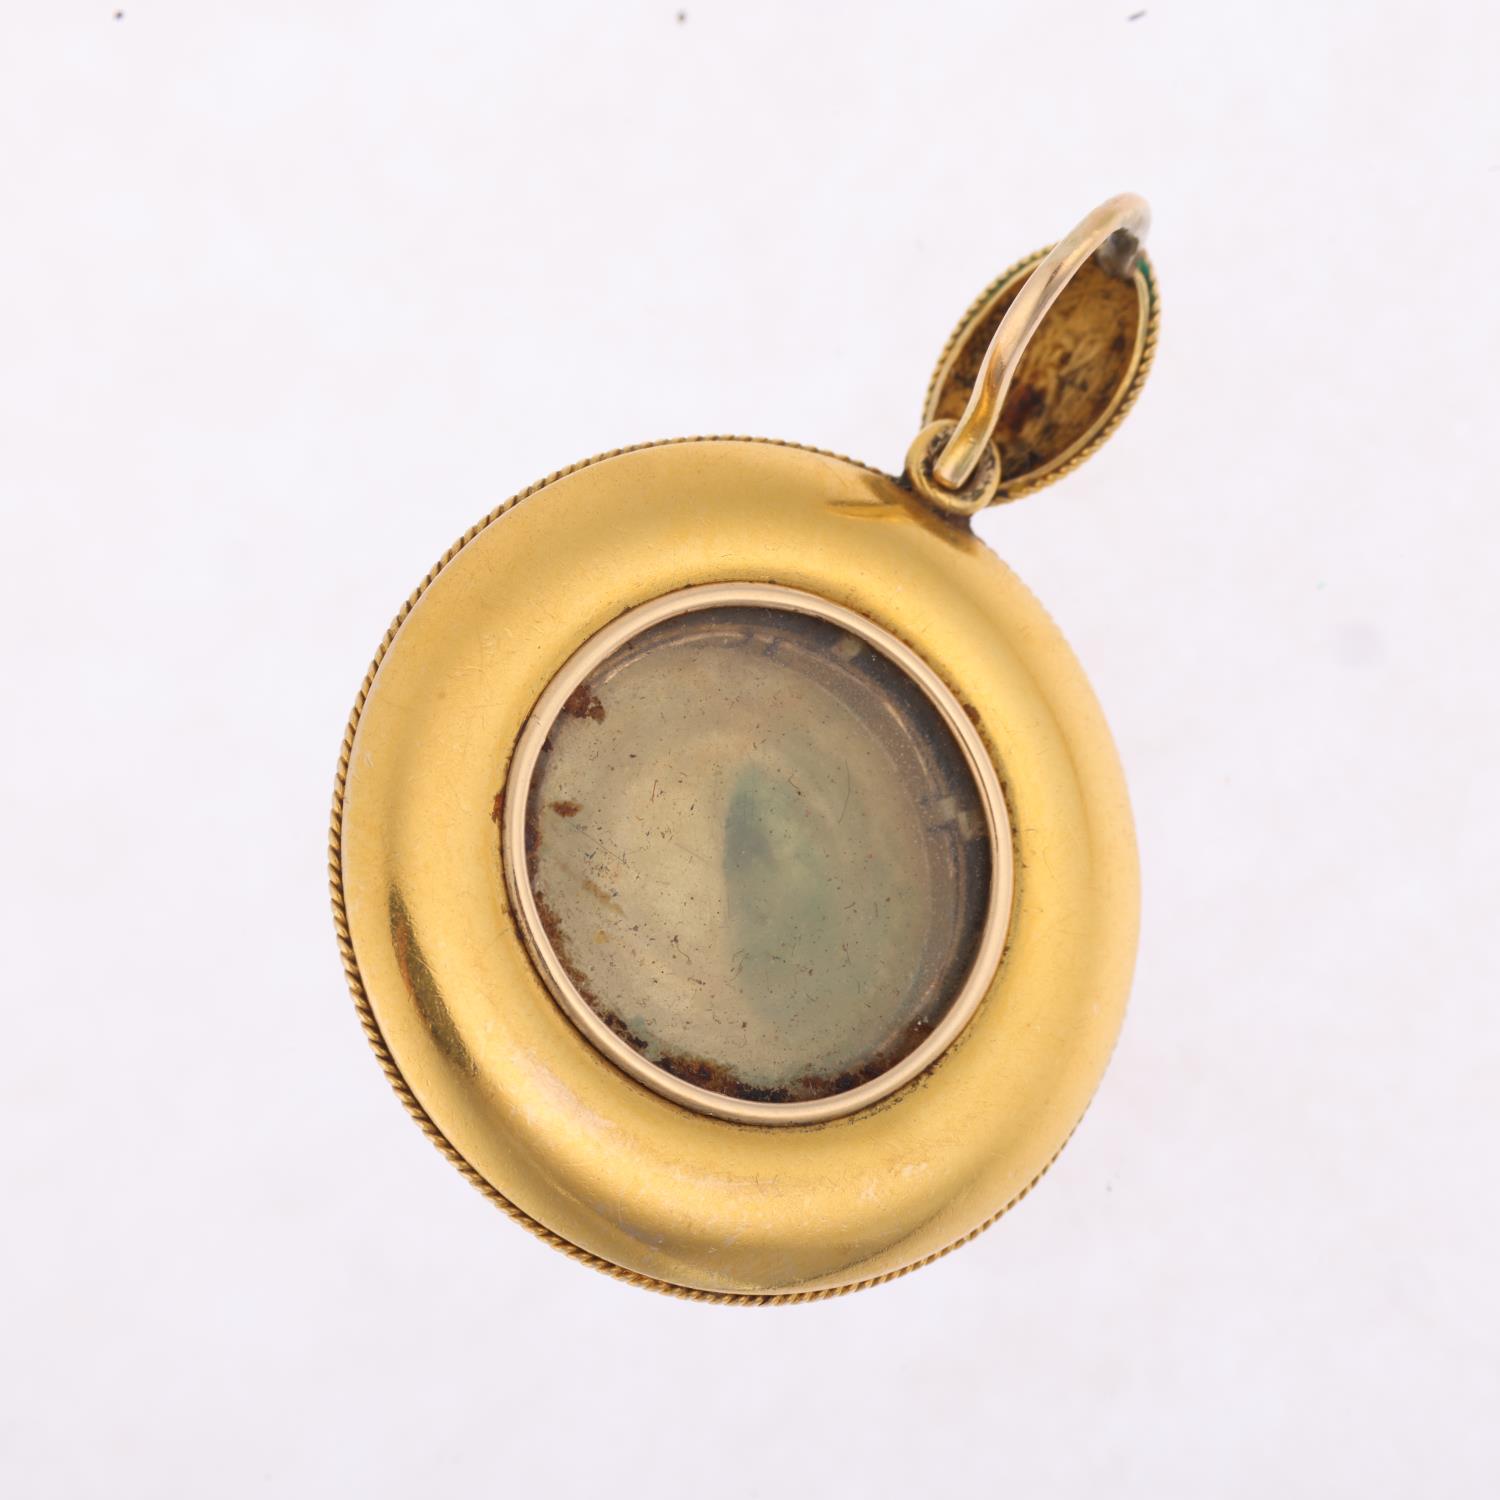 A Victorian Etruscan Revival garnet mourning locket pendant, circa 1880, centrally set with foil- - Image 3 of 4